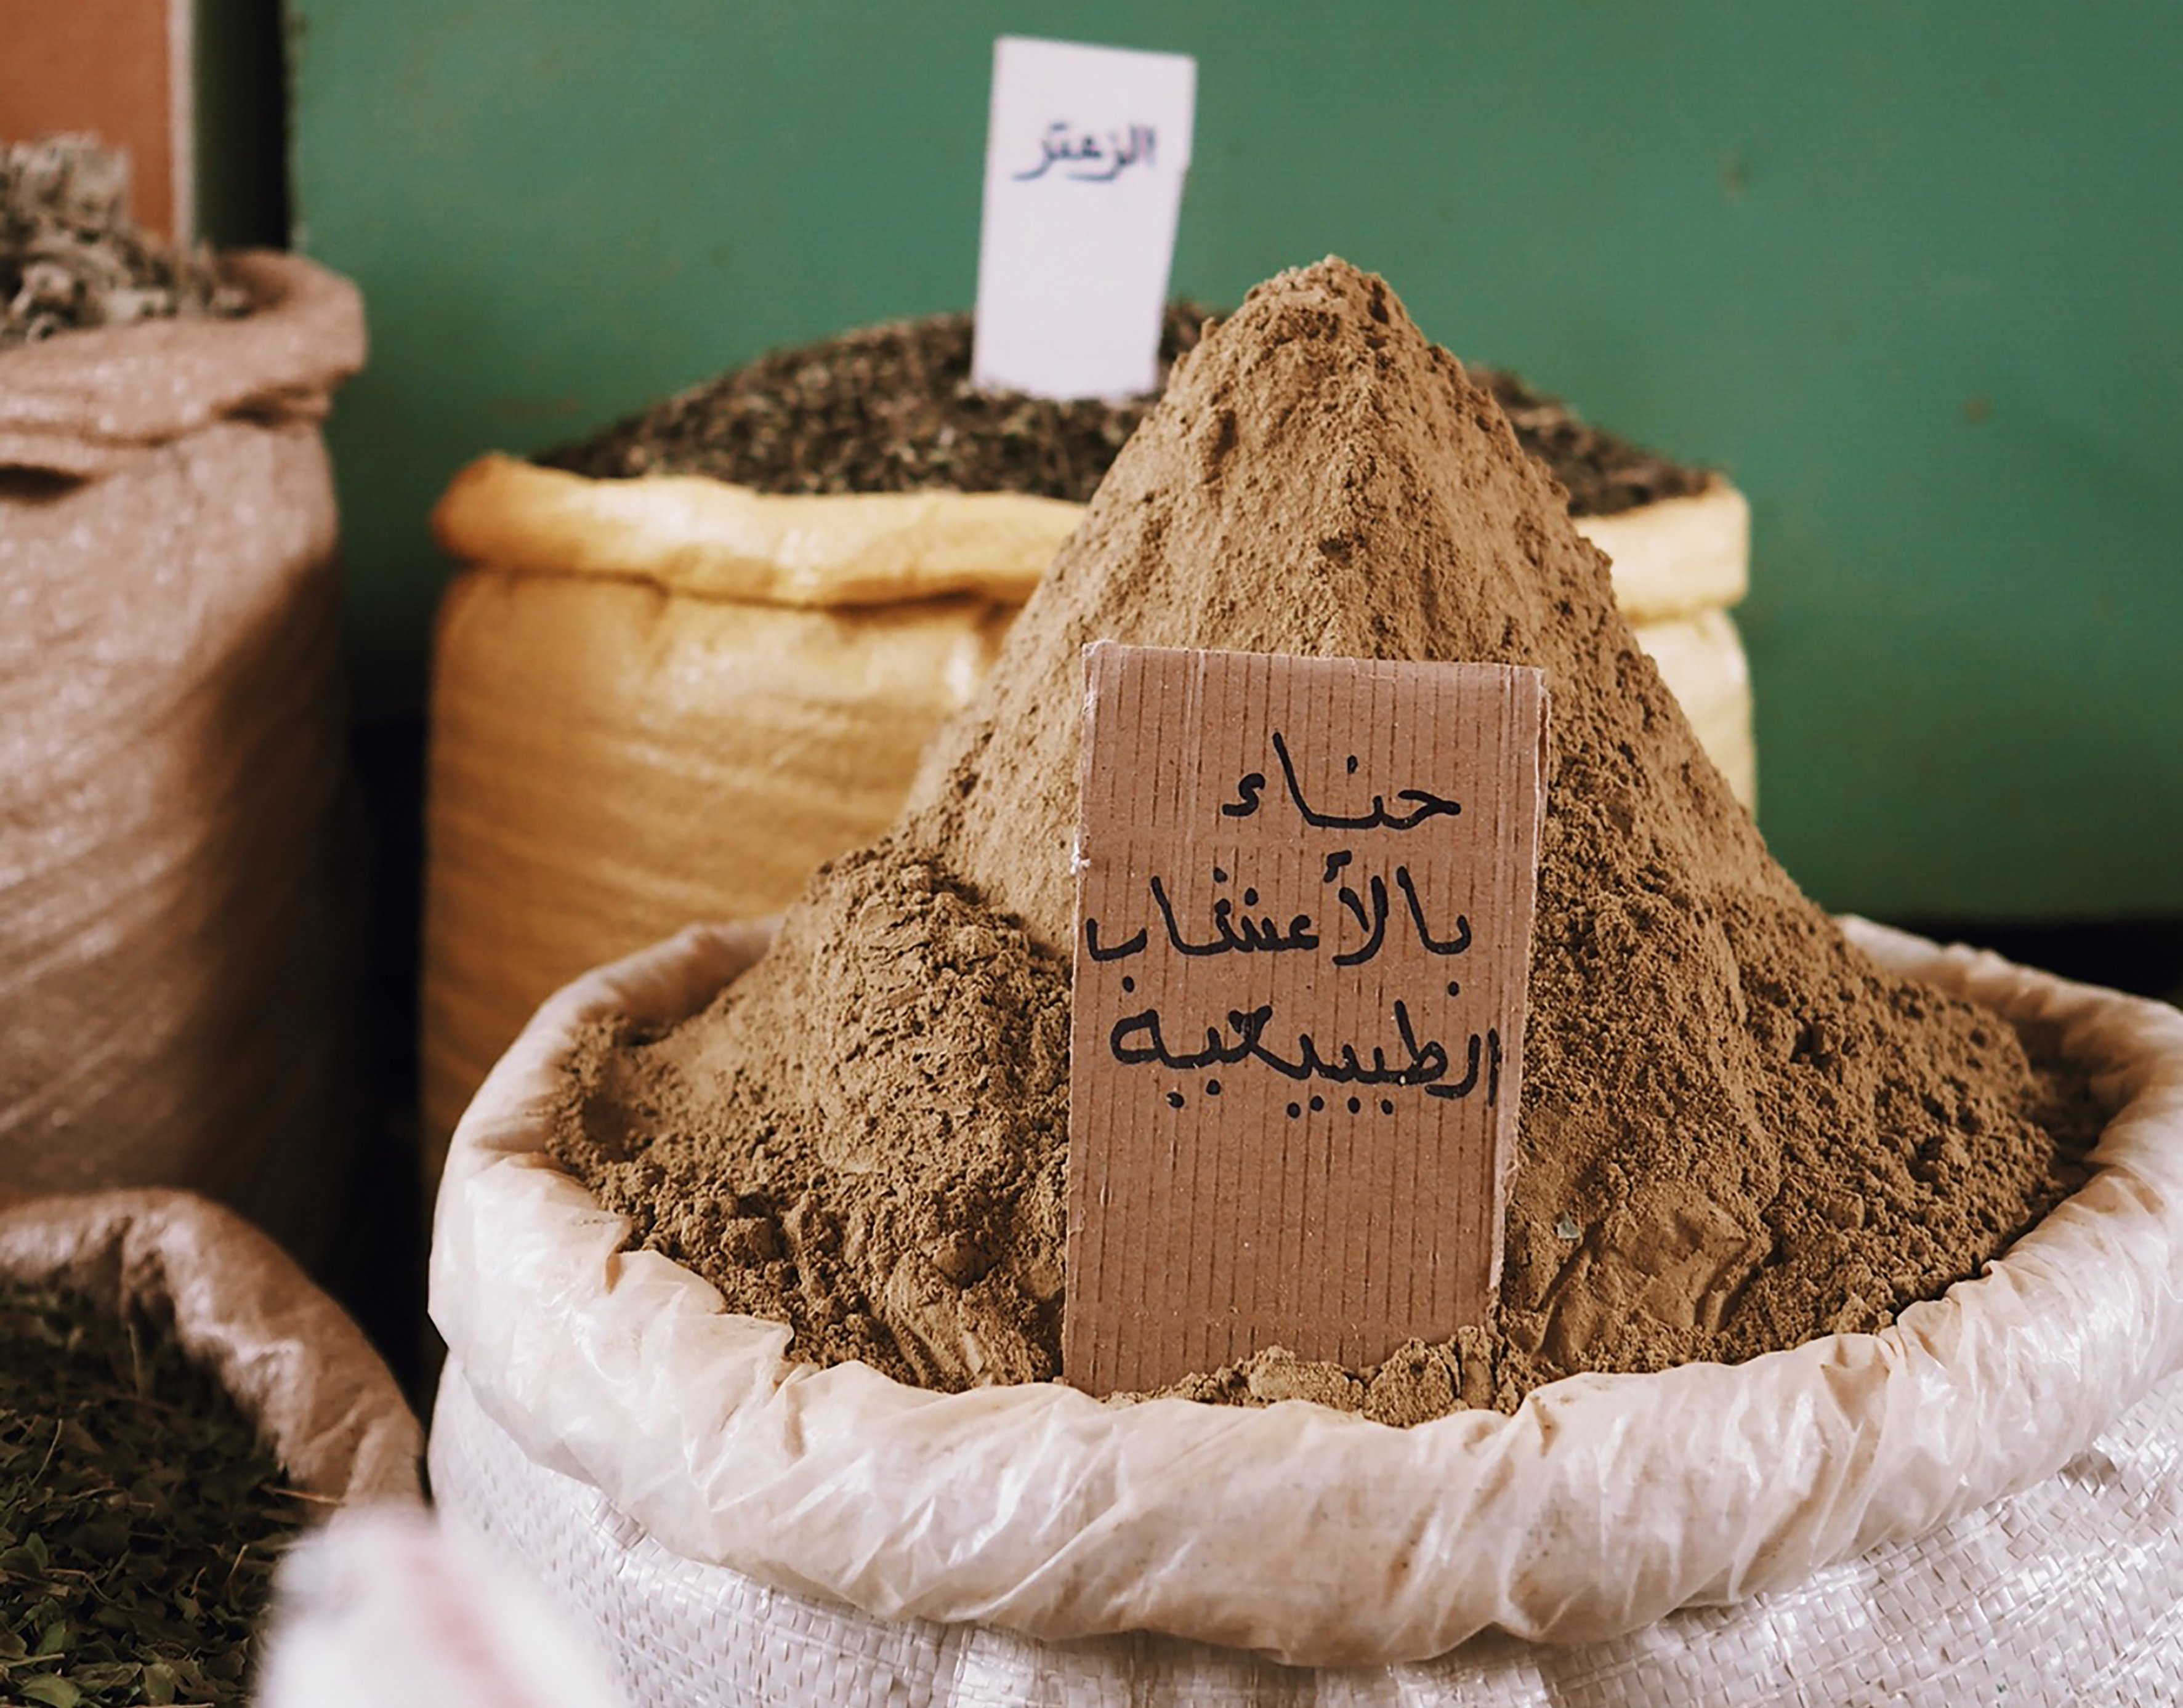 bulk materials for sale at a market in Erfoud, Morocco